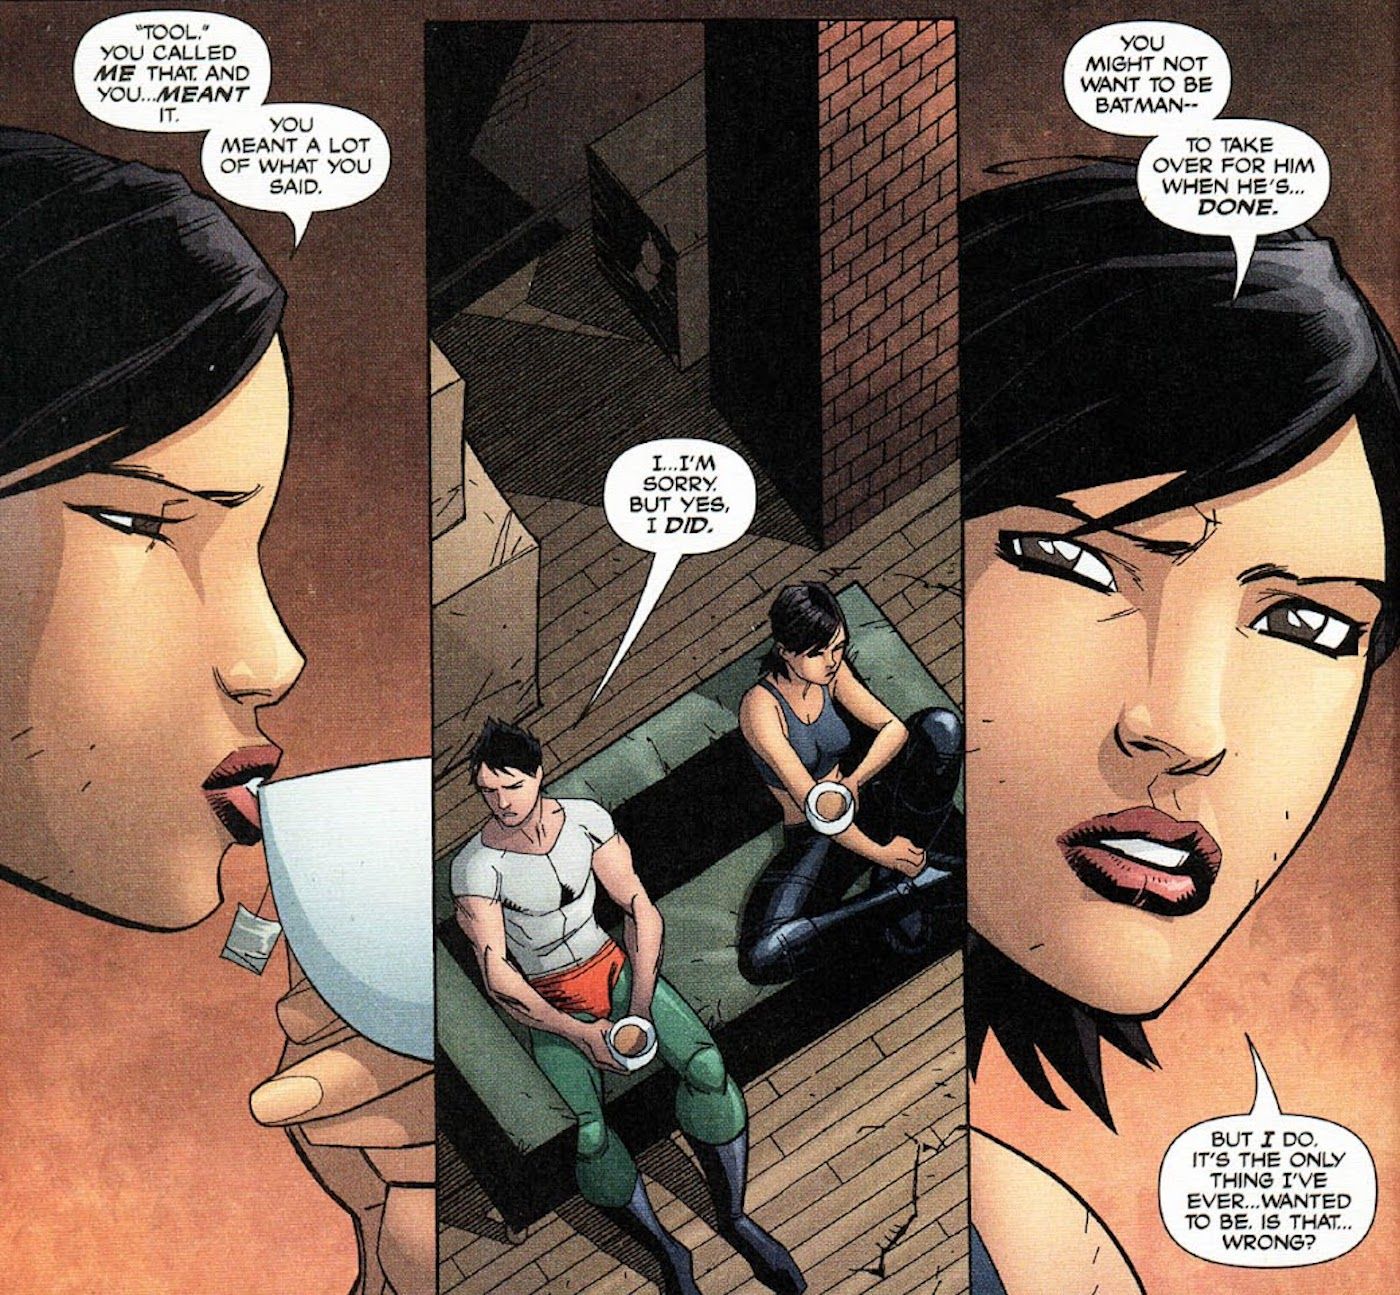 Cassandra Cain admits that she wants to be Batman when Bruce retires